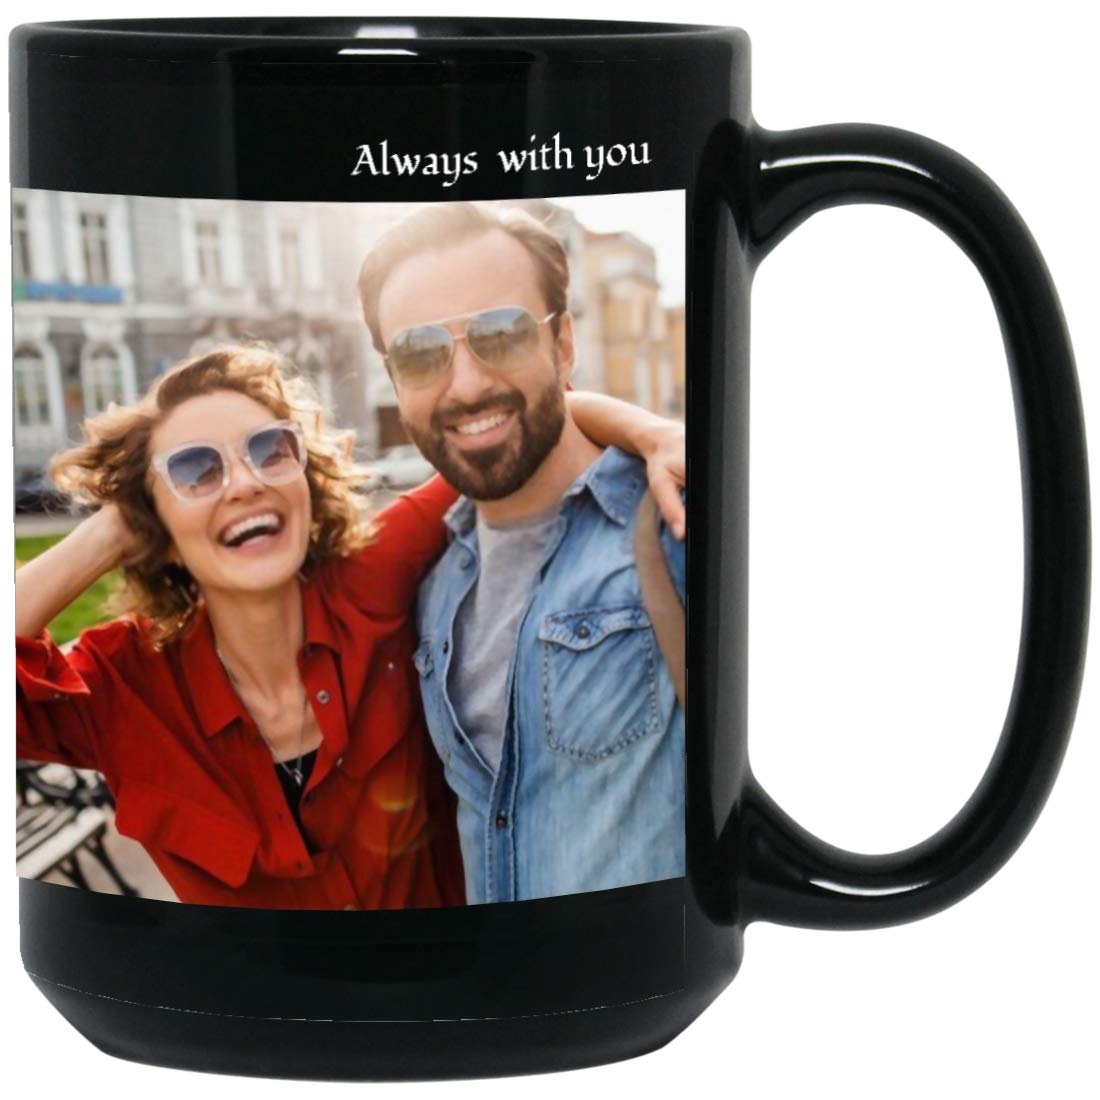 Custom Coffee Mug 15 OZ Personalized Black Cup with Picture Text Name Taza Personalizadas Customized Photo Mug, Gift for Birthday Anniversary Valenti-ne's/Father/Mother's Day